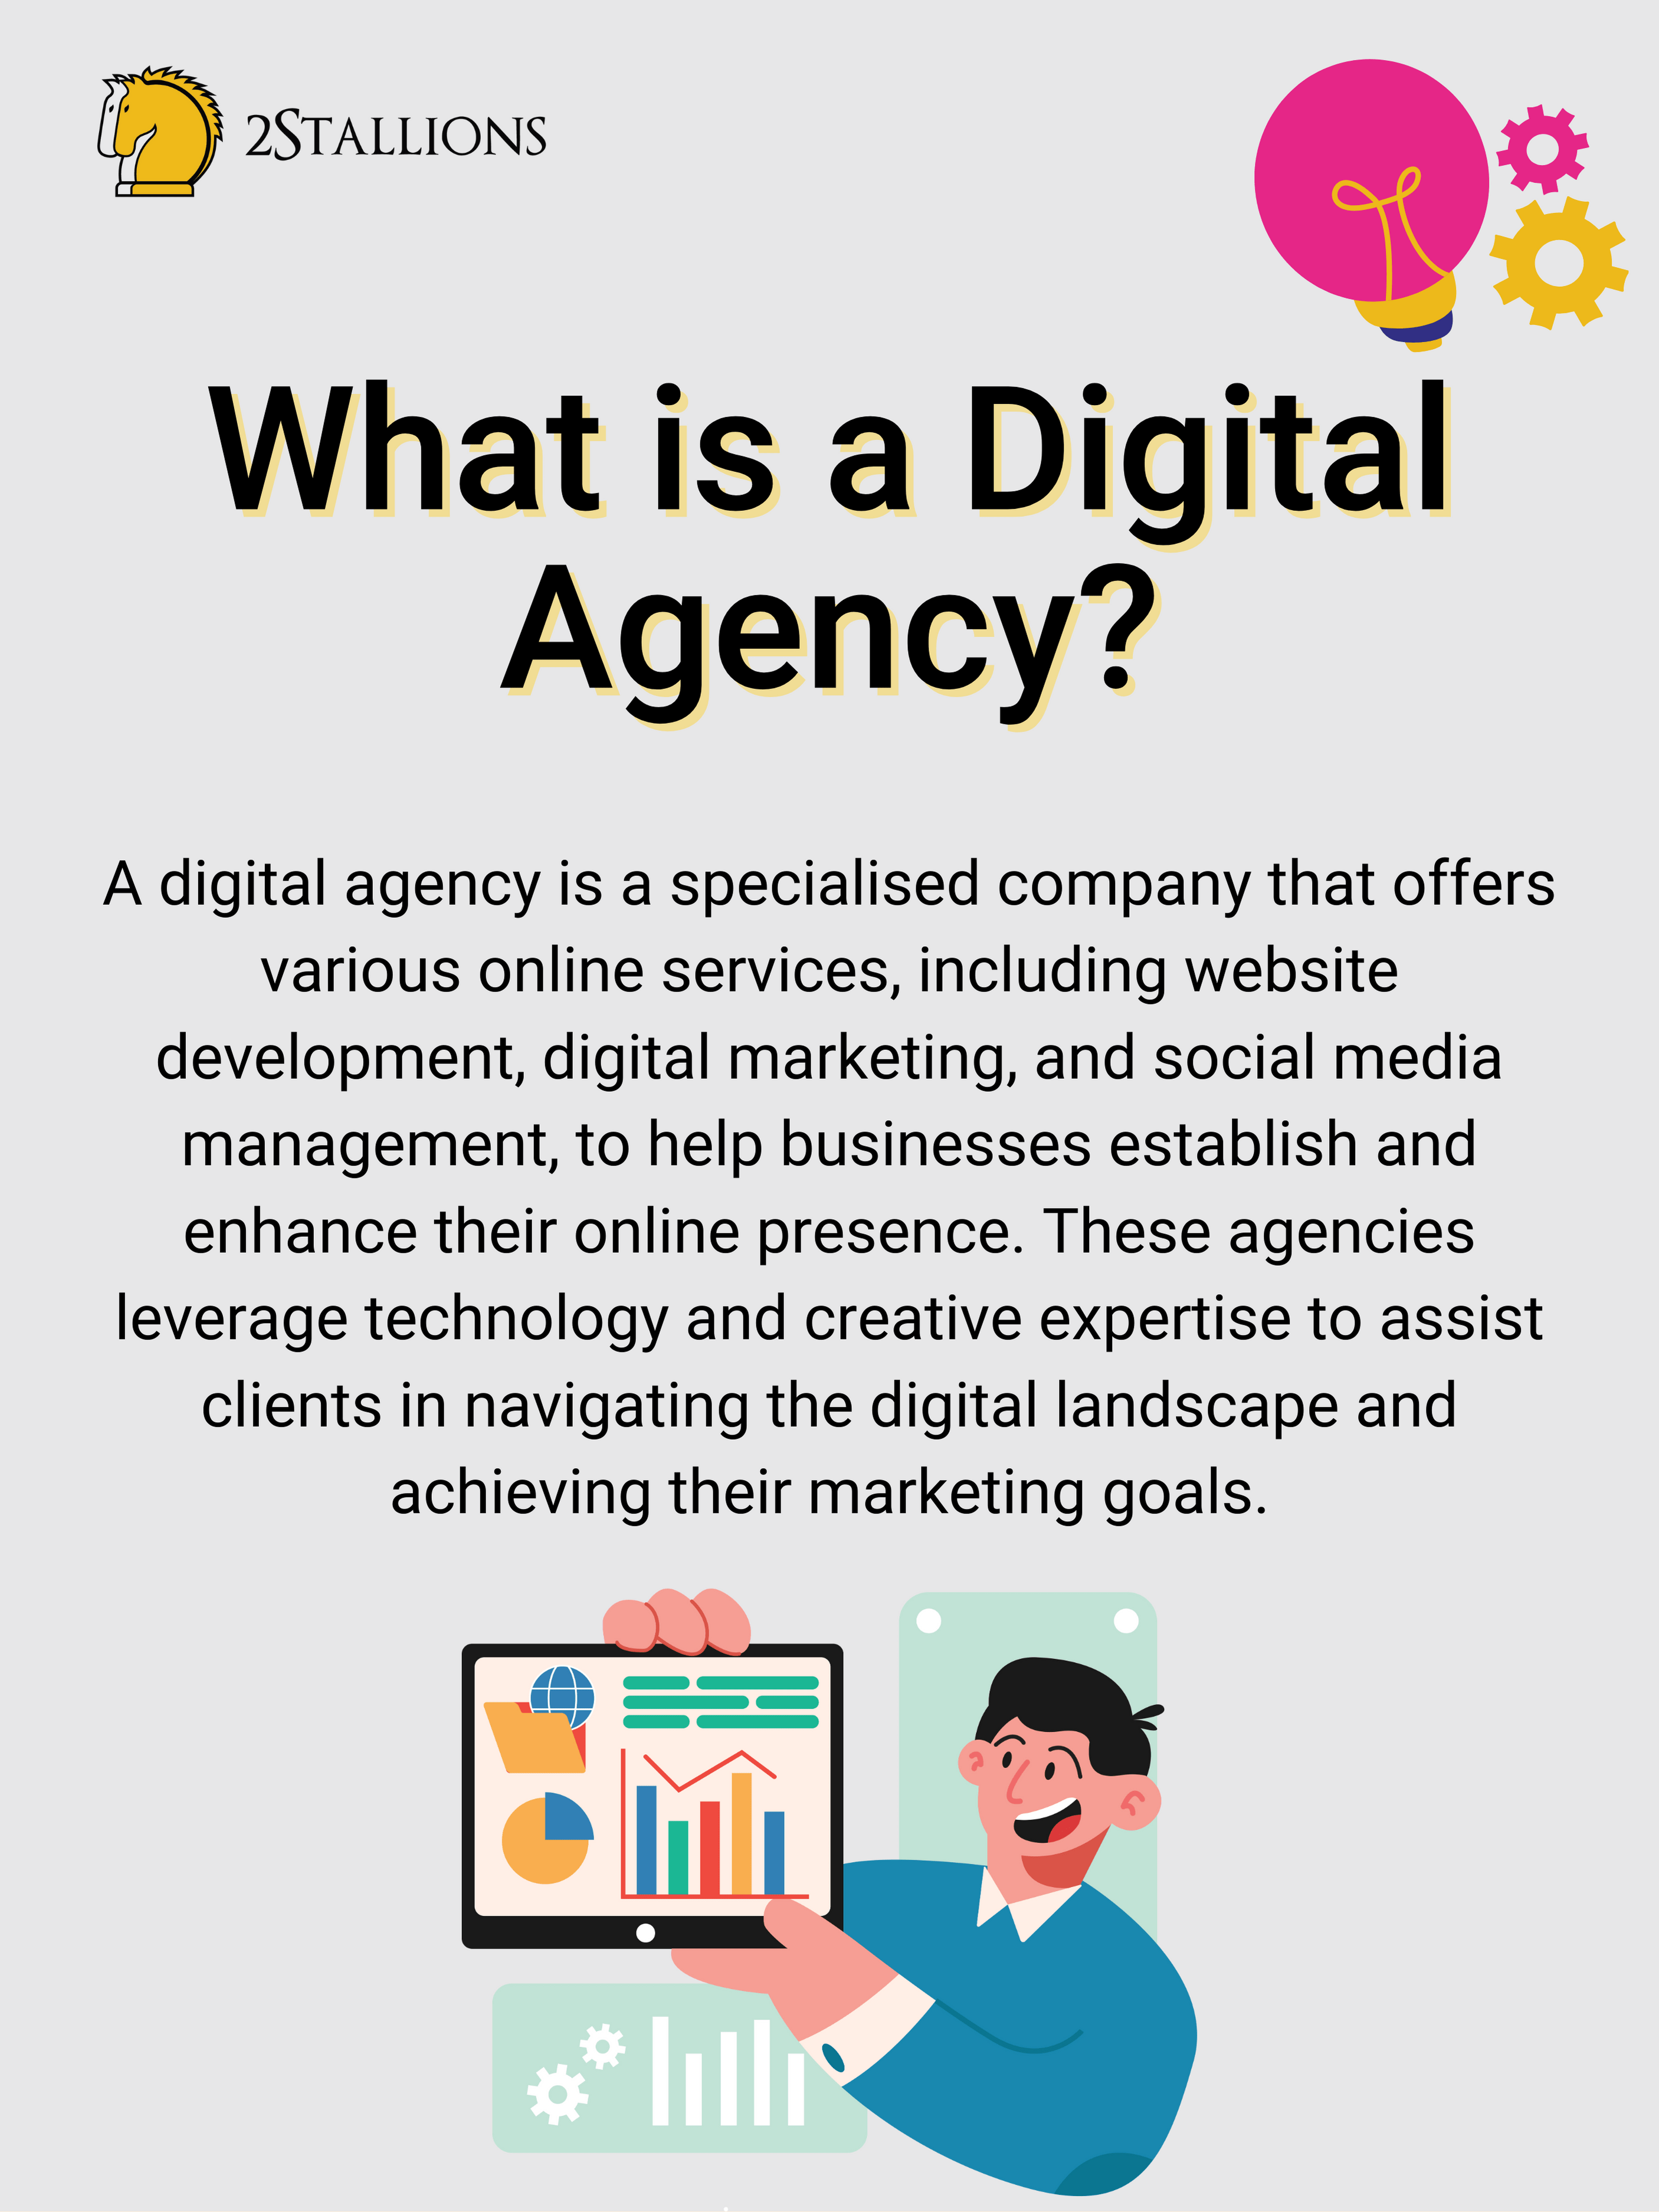 What Is a Digital Agency | 2Stallions